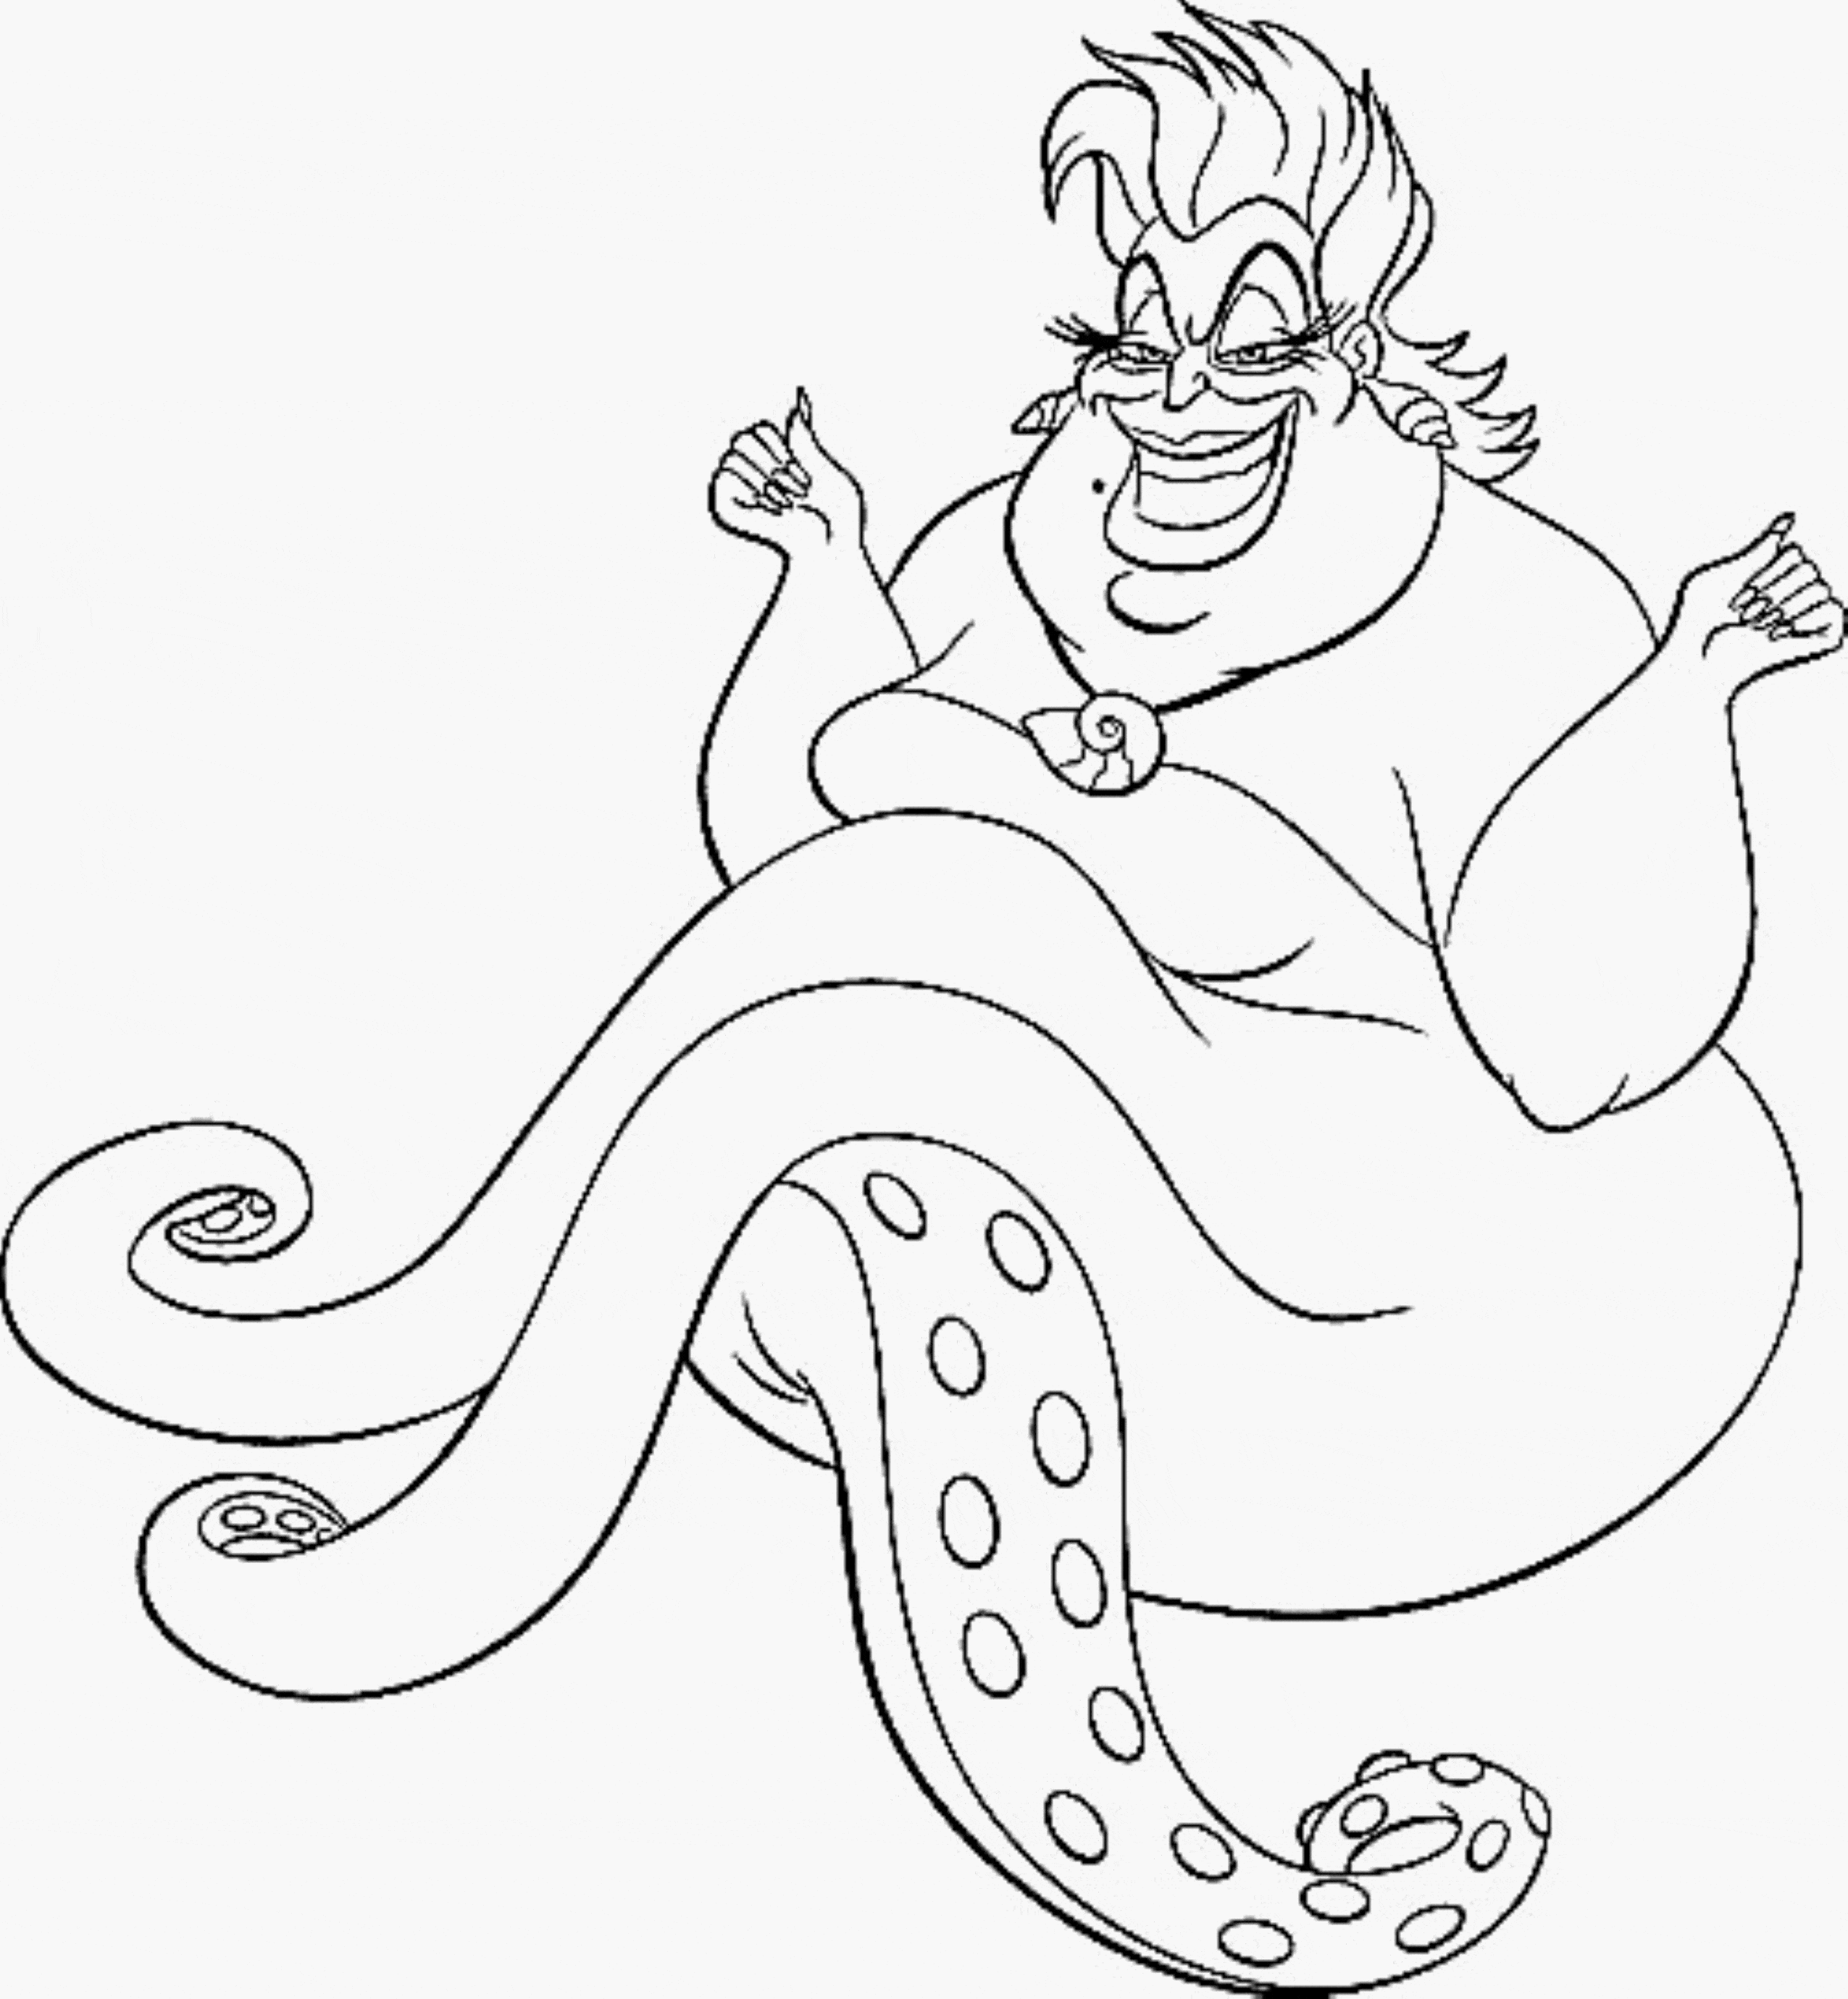 Print Download Find the Suitable Little Mermaid Coloring Pages for